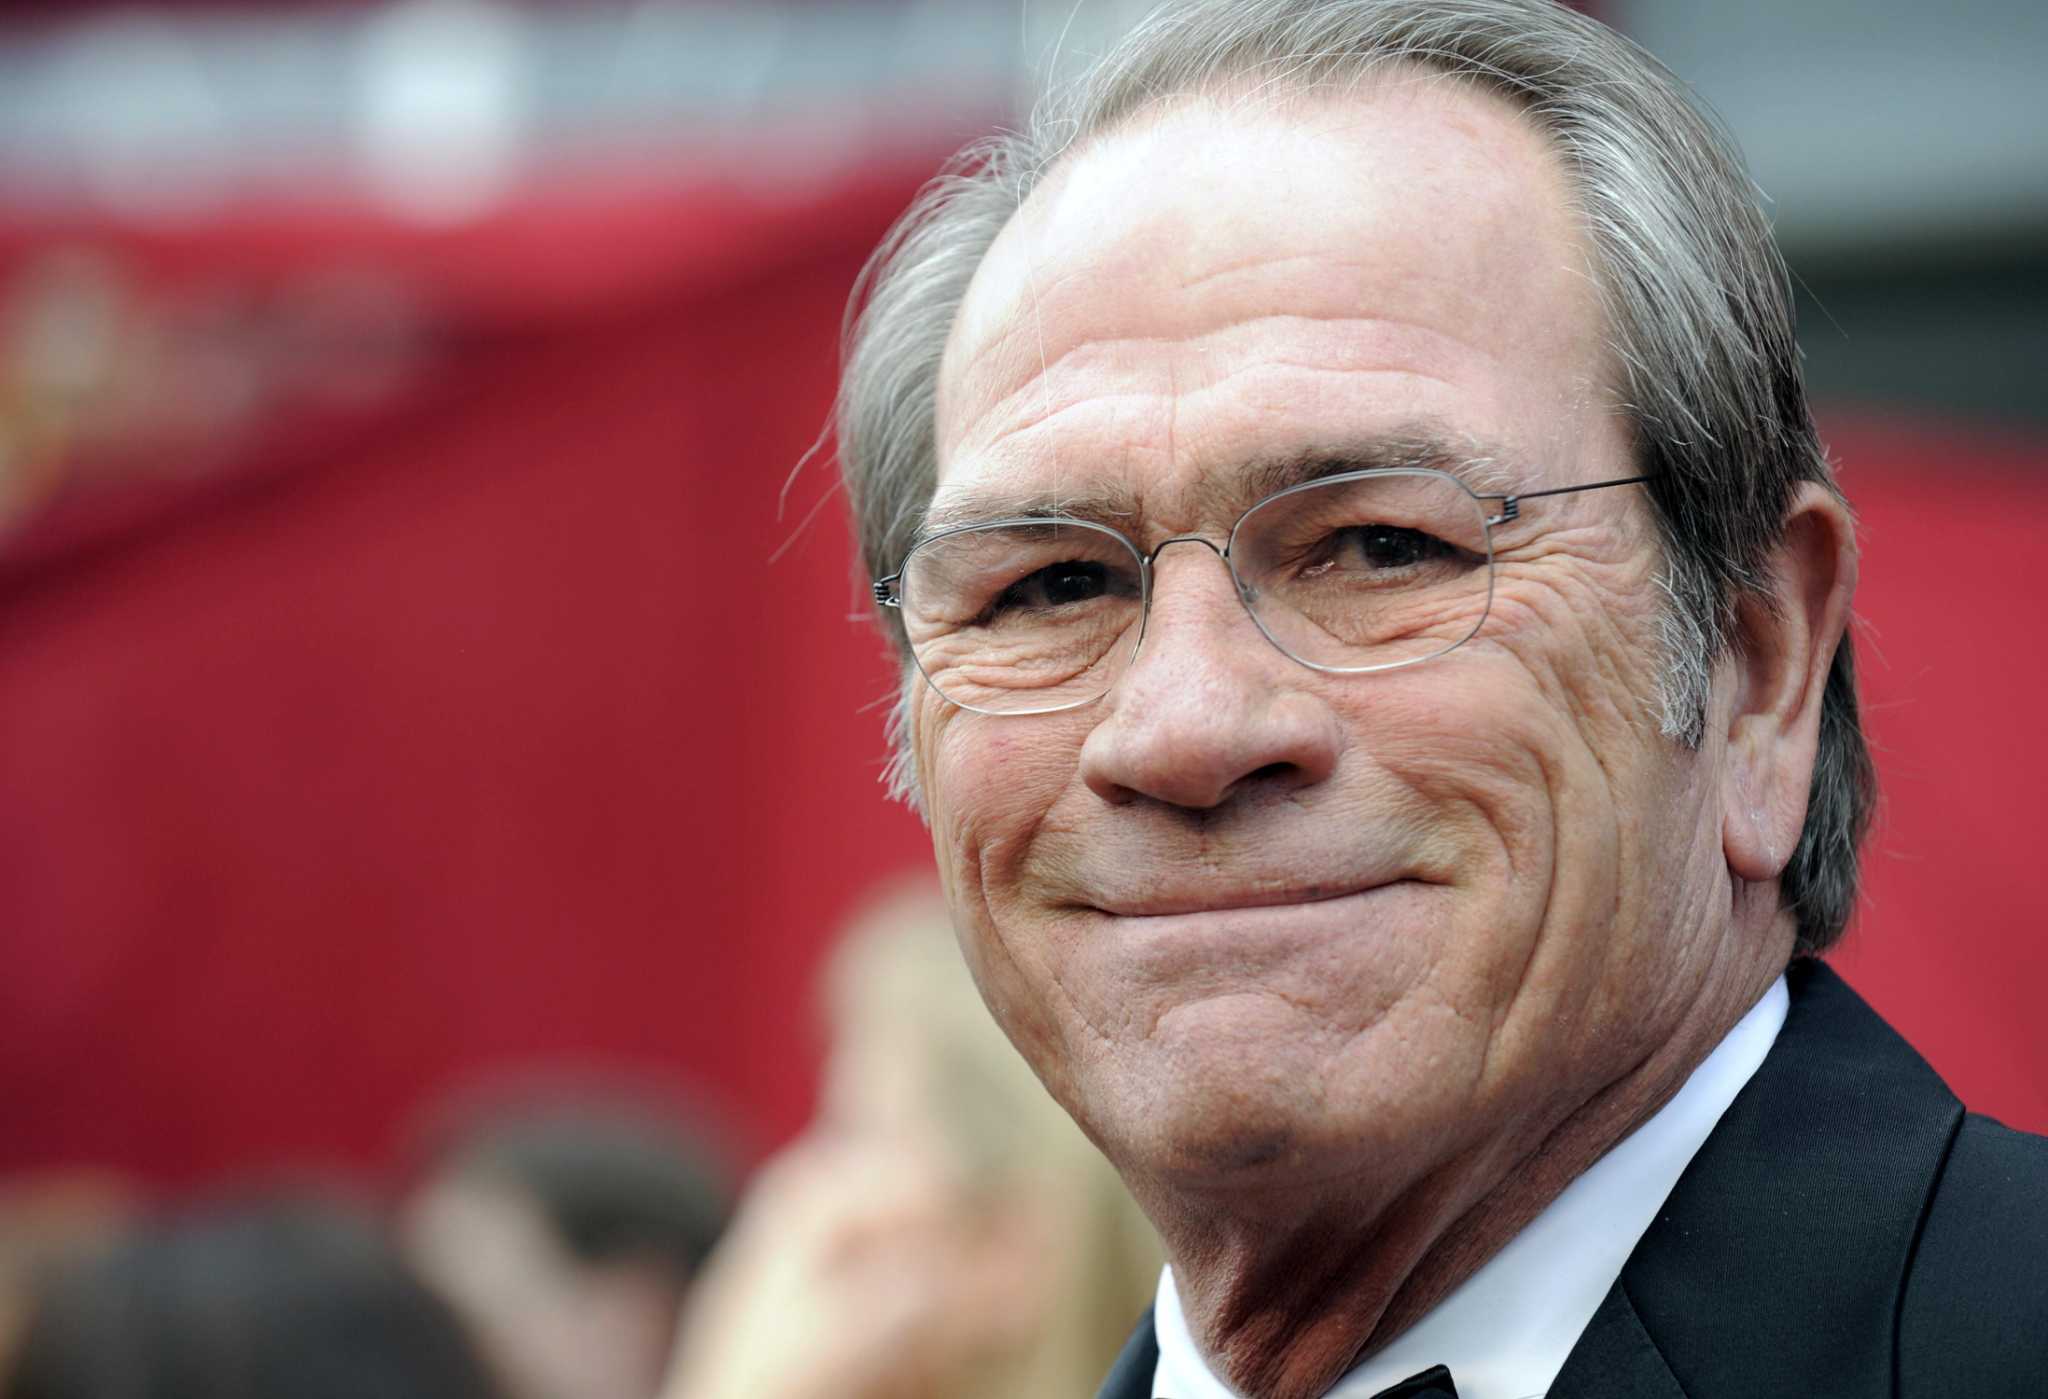 Tommy Lee Jones: Quirky facts about his San Antonio ties